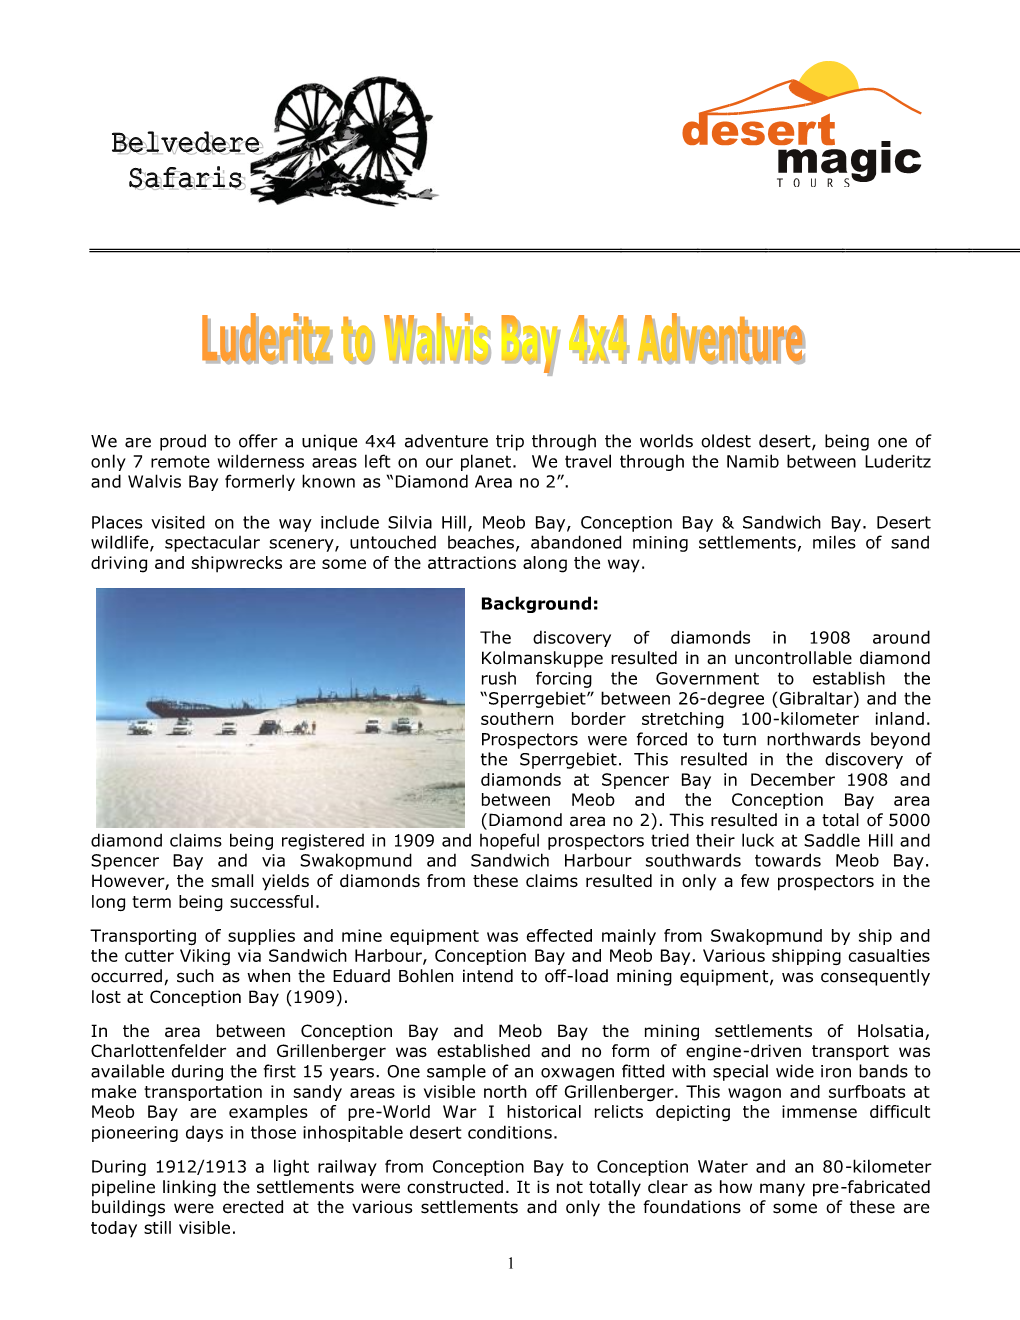 Coastways Tours and URI Adventures Joint Forces Offering This Trip Into the Namib Desert Between Luderitz and Walvis